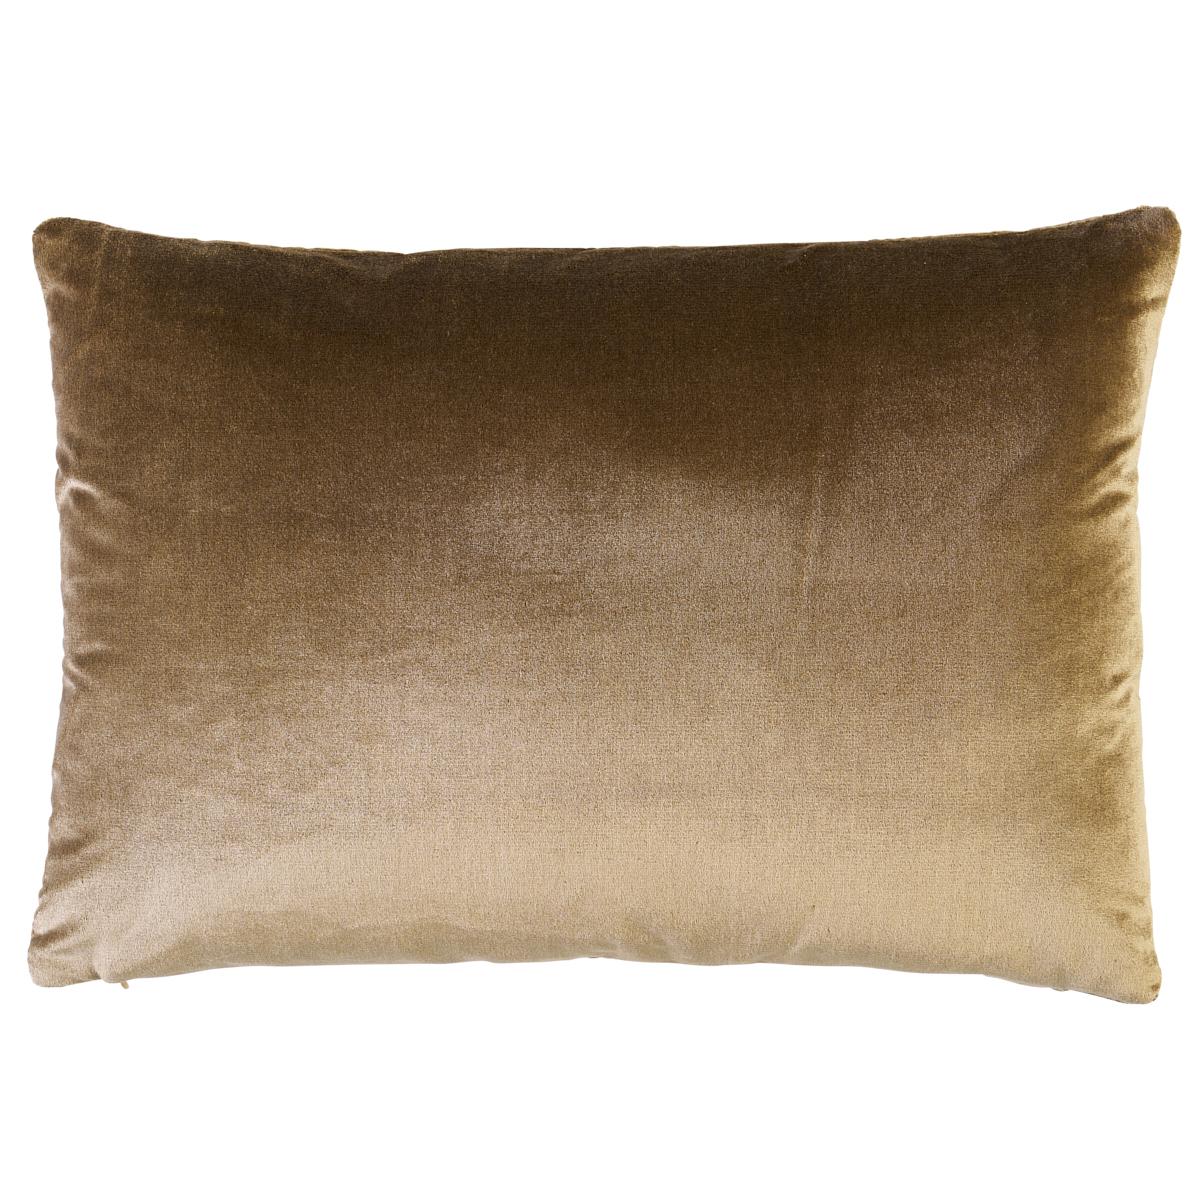 This pillow features Allure Metallic Tape with a knife edge finish. With its exquisite weave of metallic yarns and delicate zigzag edge, this trim is elegant and understated. Body of pillow is Venetian Silk Velvet. Pillow includes a feather/down